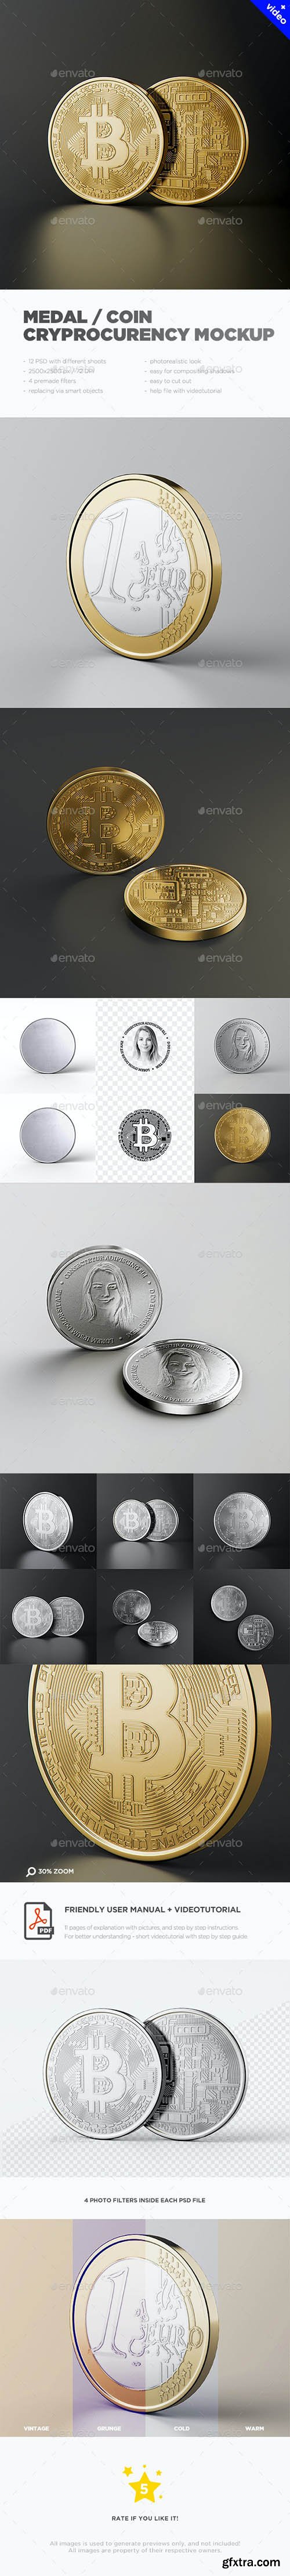 GraphicRiver - Medal / Coin / Cryprocurency MockUp 32332303